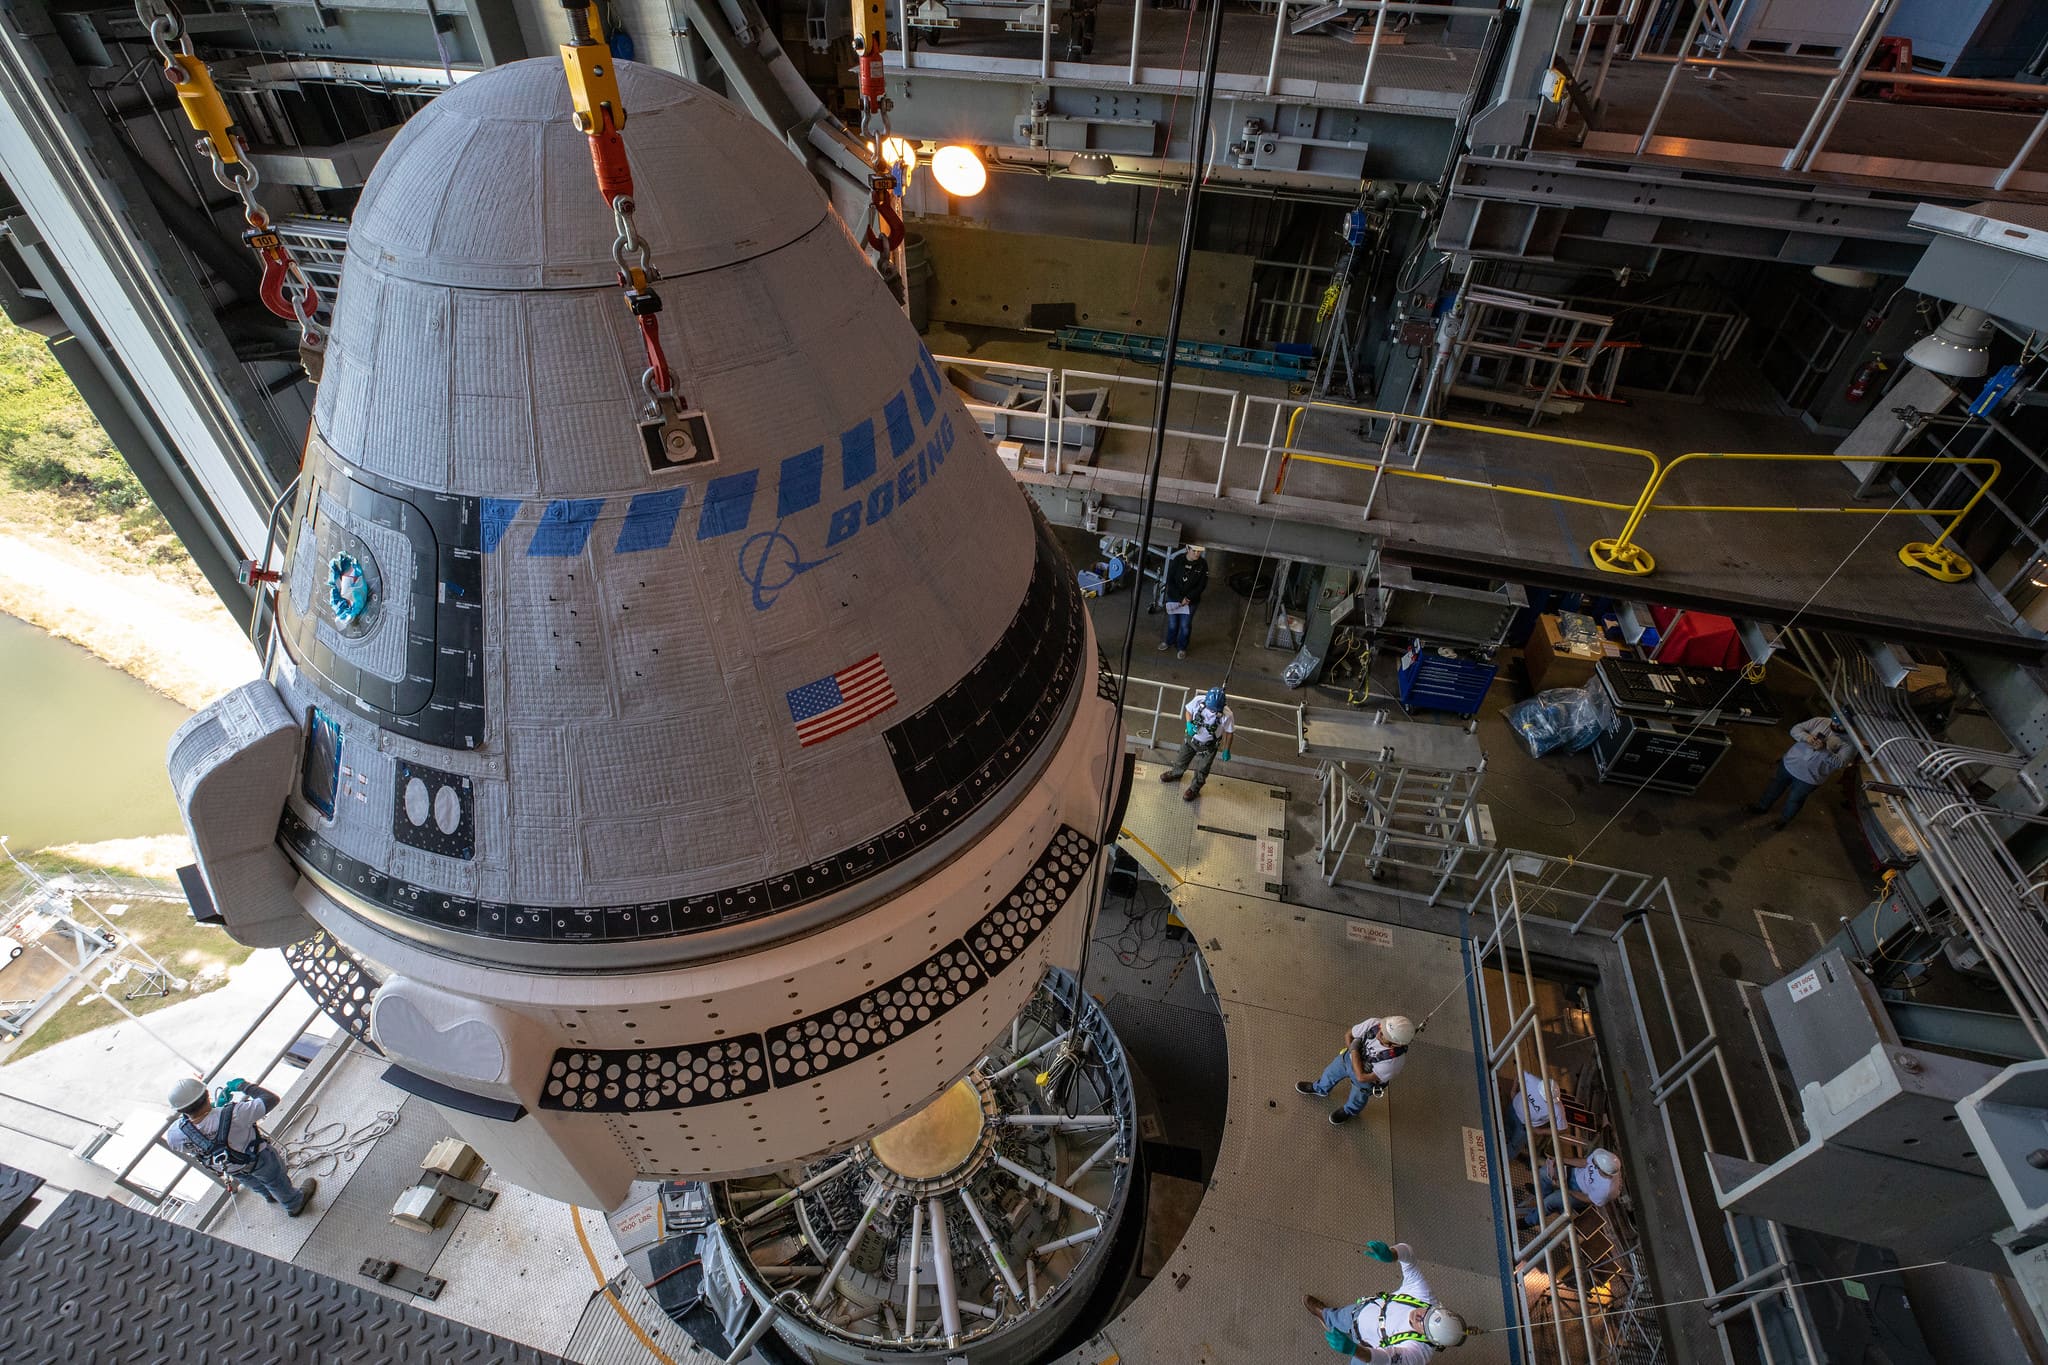 NASA and Boeing aim to redo Starliner spacecraft test later this year after investigating failures - CNBC